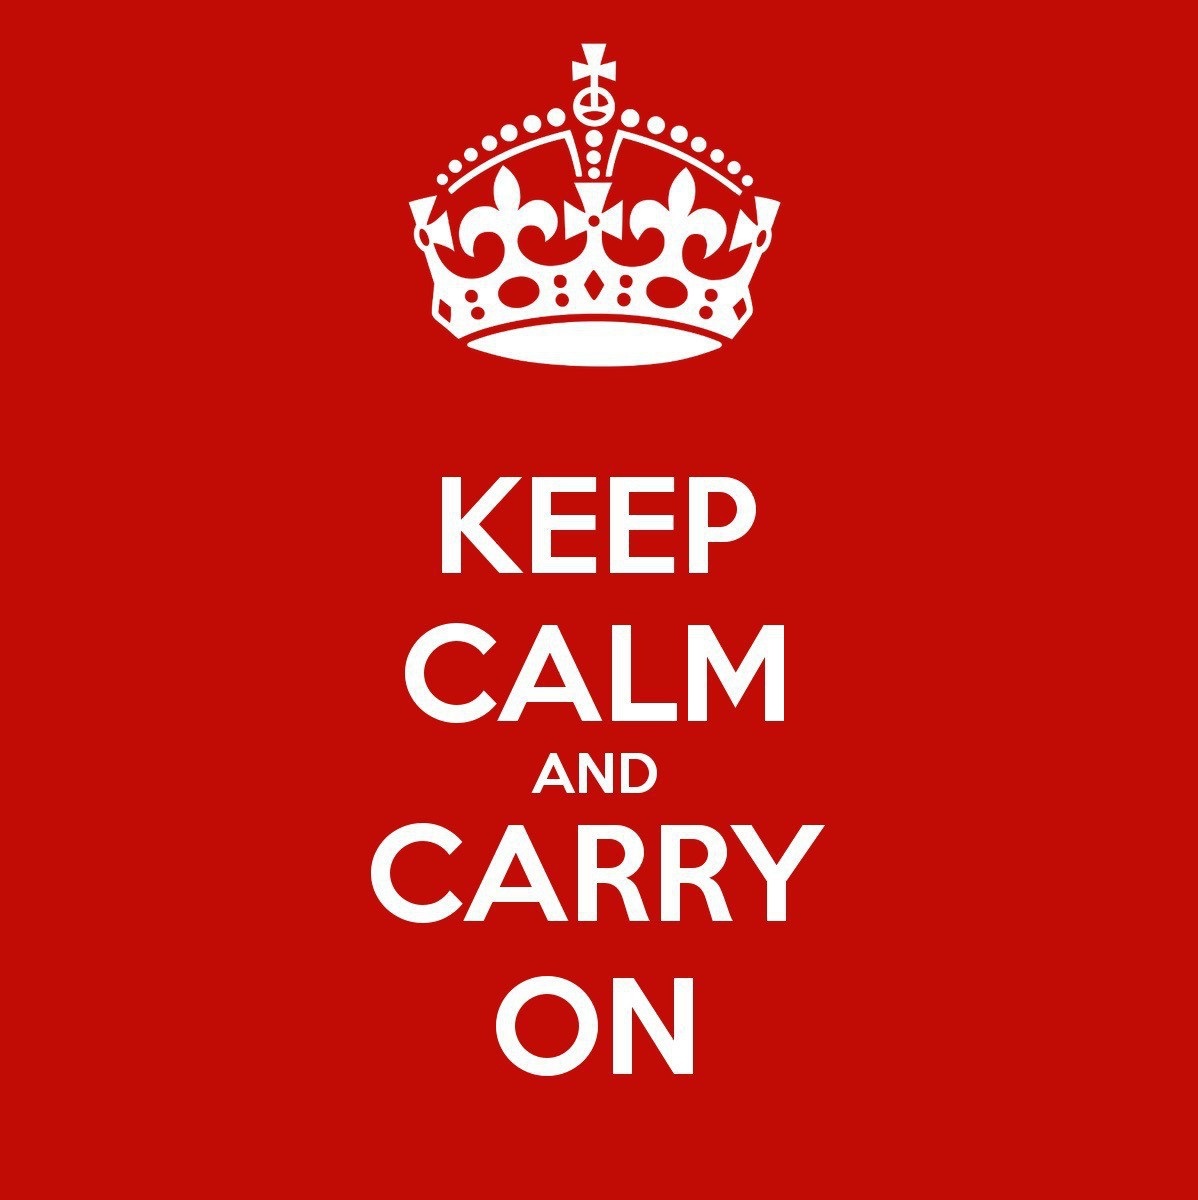 Keep Calm & Carry On poster